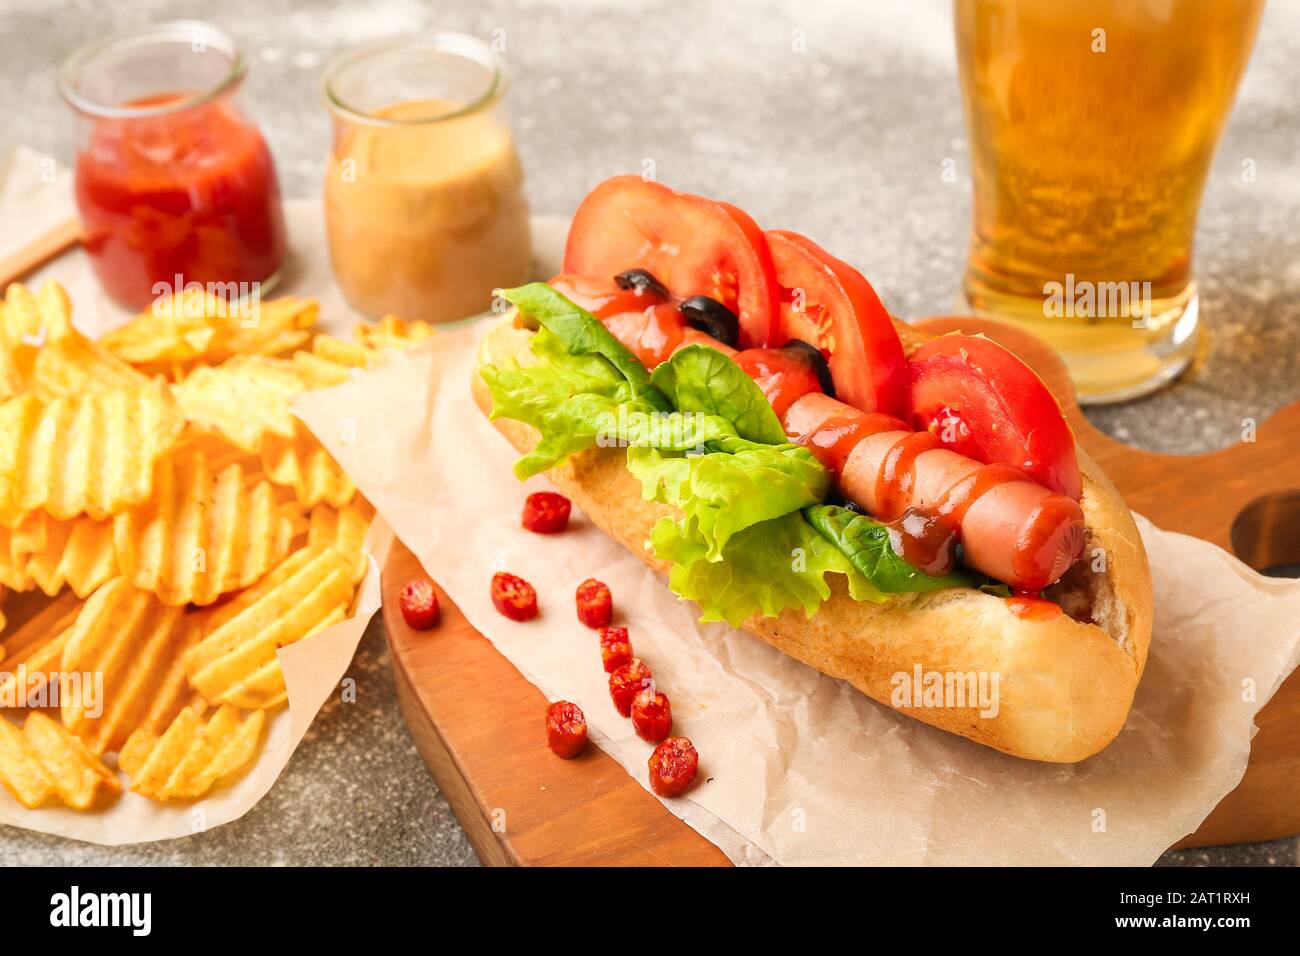 Tasty hot dog, chips and beer on table Stock Photo